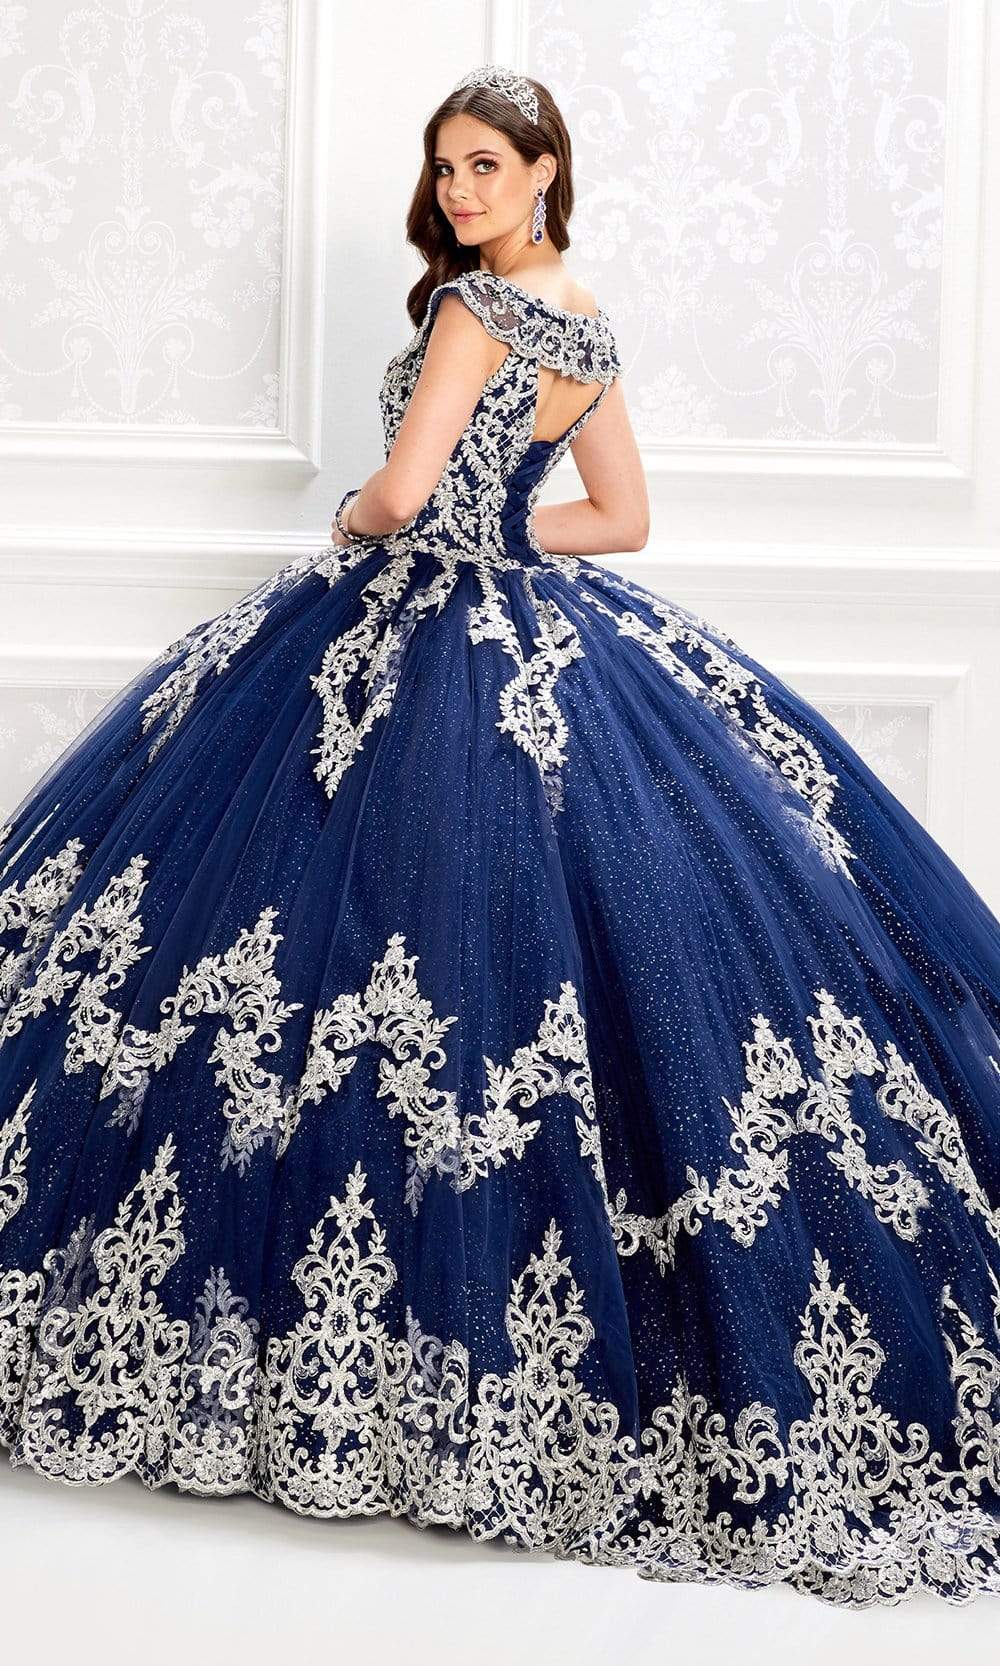 Princesa by Ariana Vara - PR22035 Scoop Neck Ball Gown Quinceanera Dresses